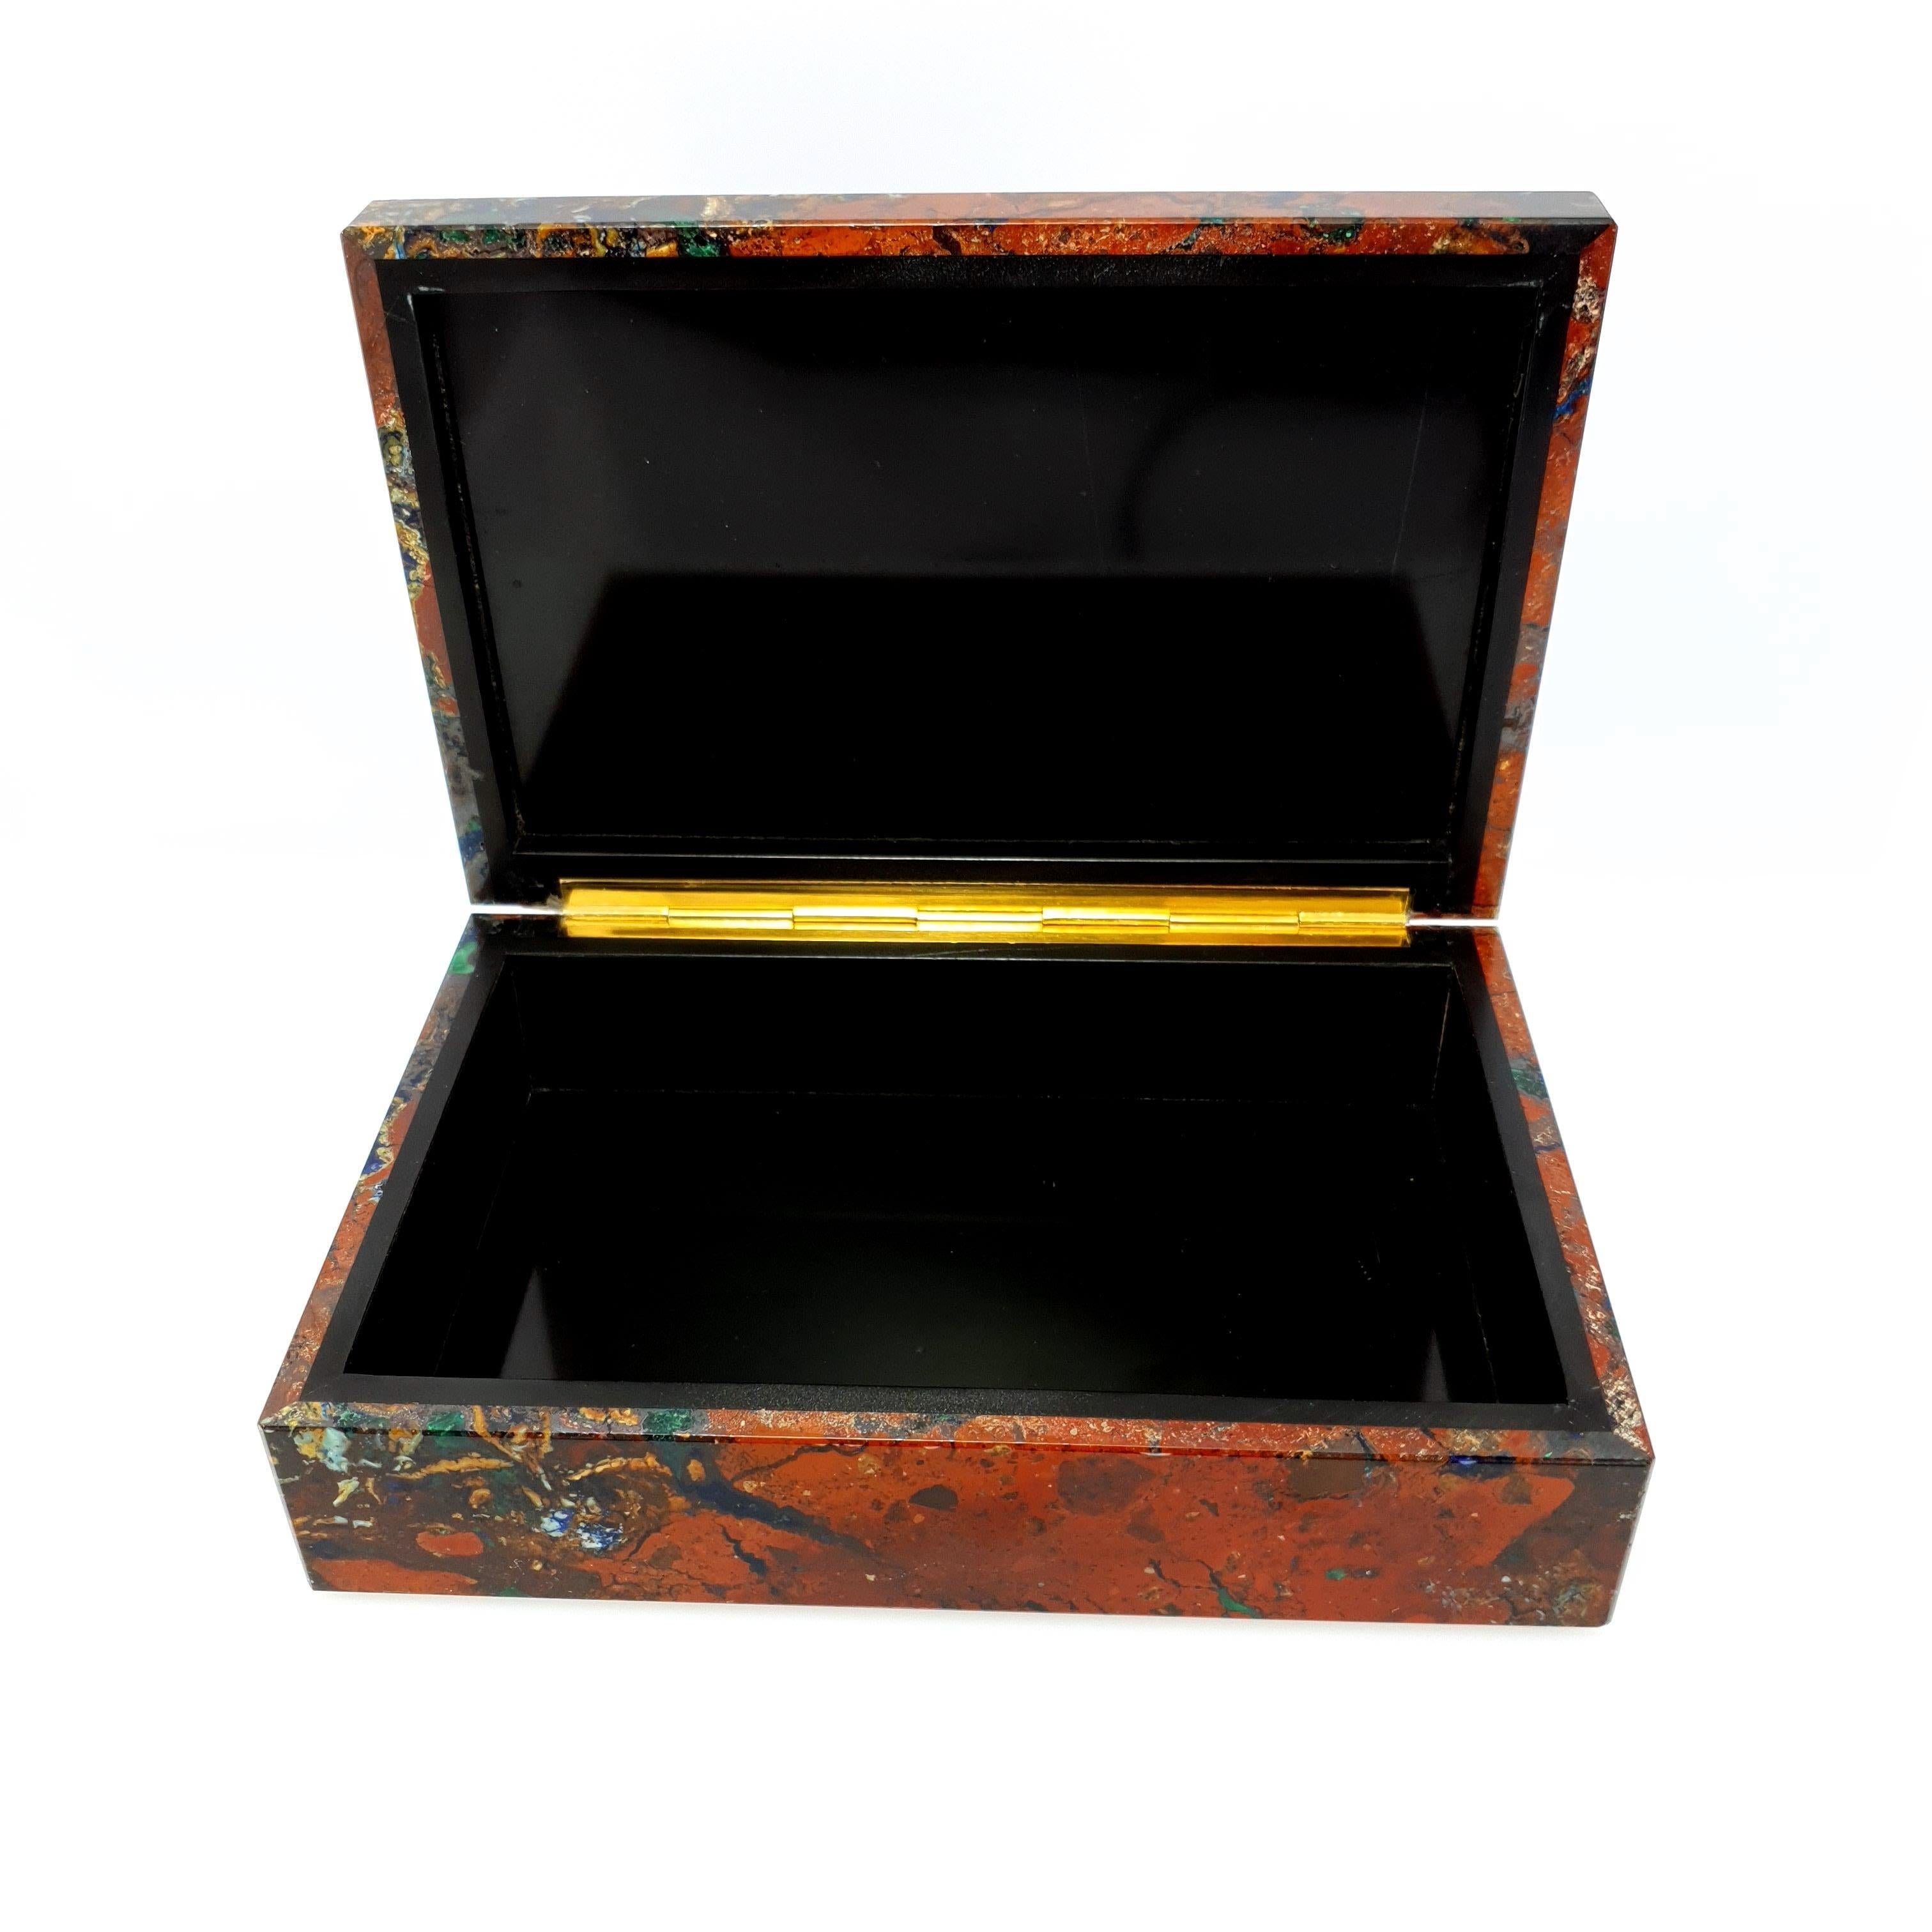 Red Brown Zarinite Decorative Jewelry Gemstone Box with Black Marble In New Condition For Sale In Kirschweiler, DE